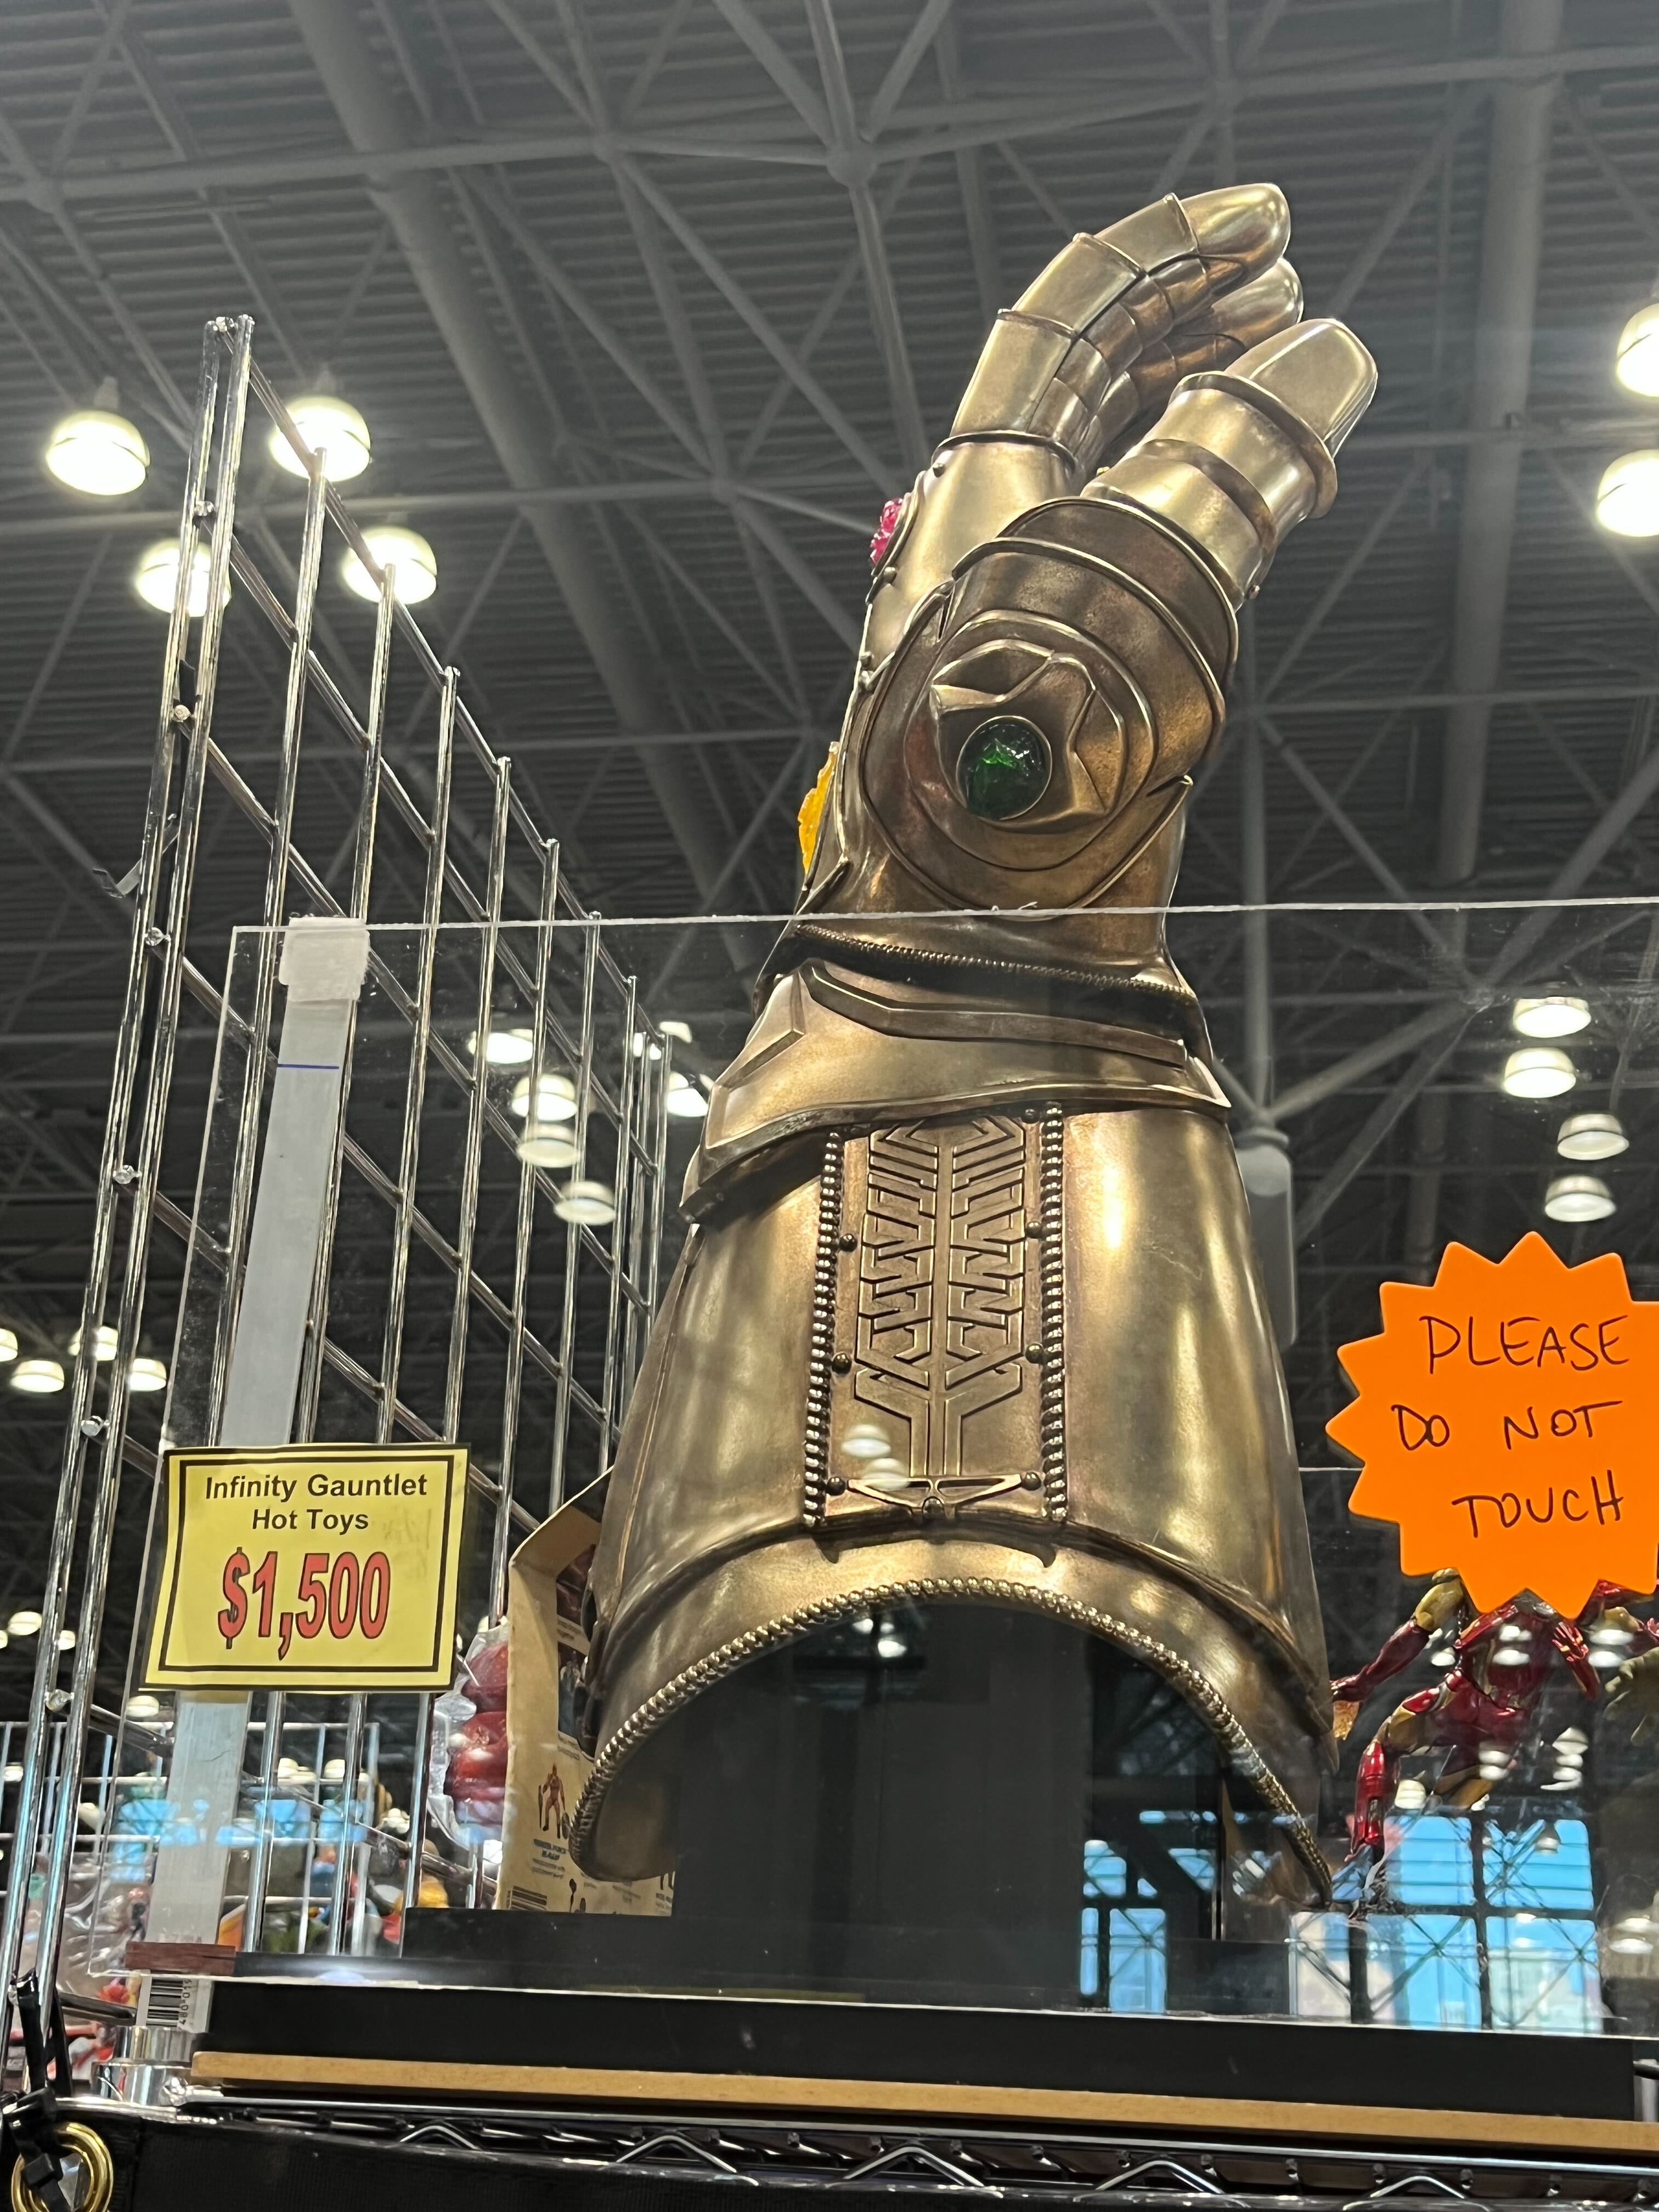 Things you can buy at comic con - landmark - Infinity Gauntlet Hot Toys $1,500 Please Do Not Touch